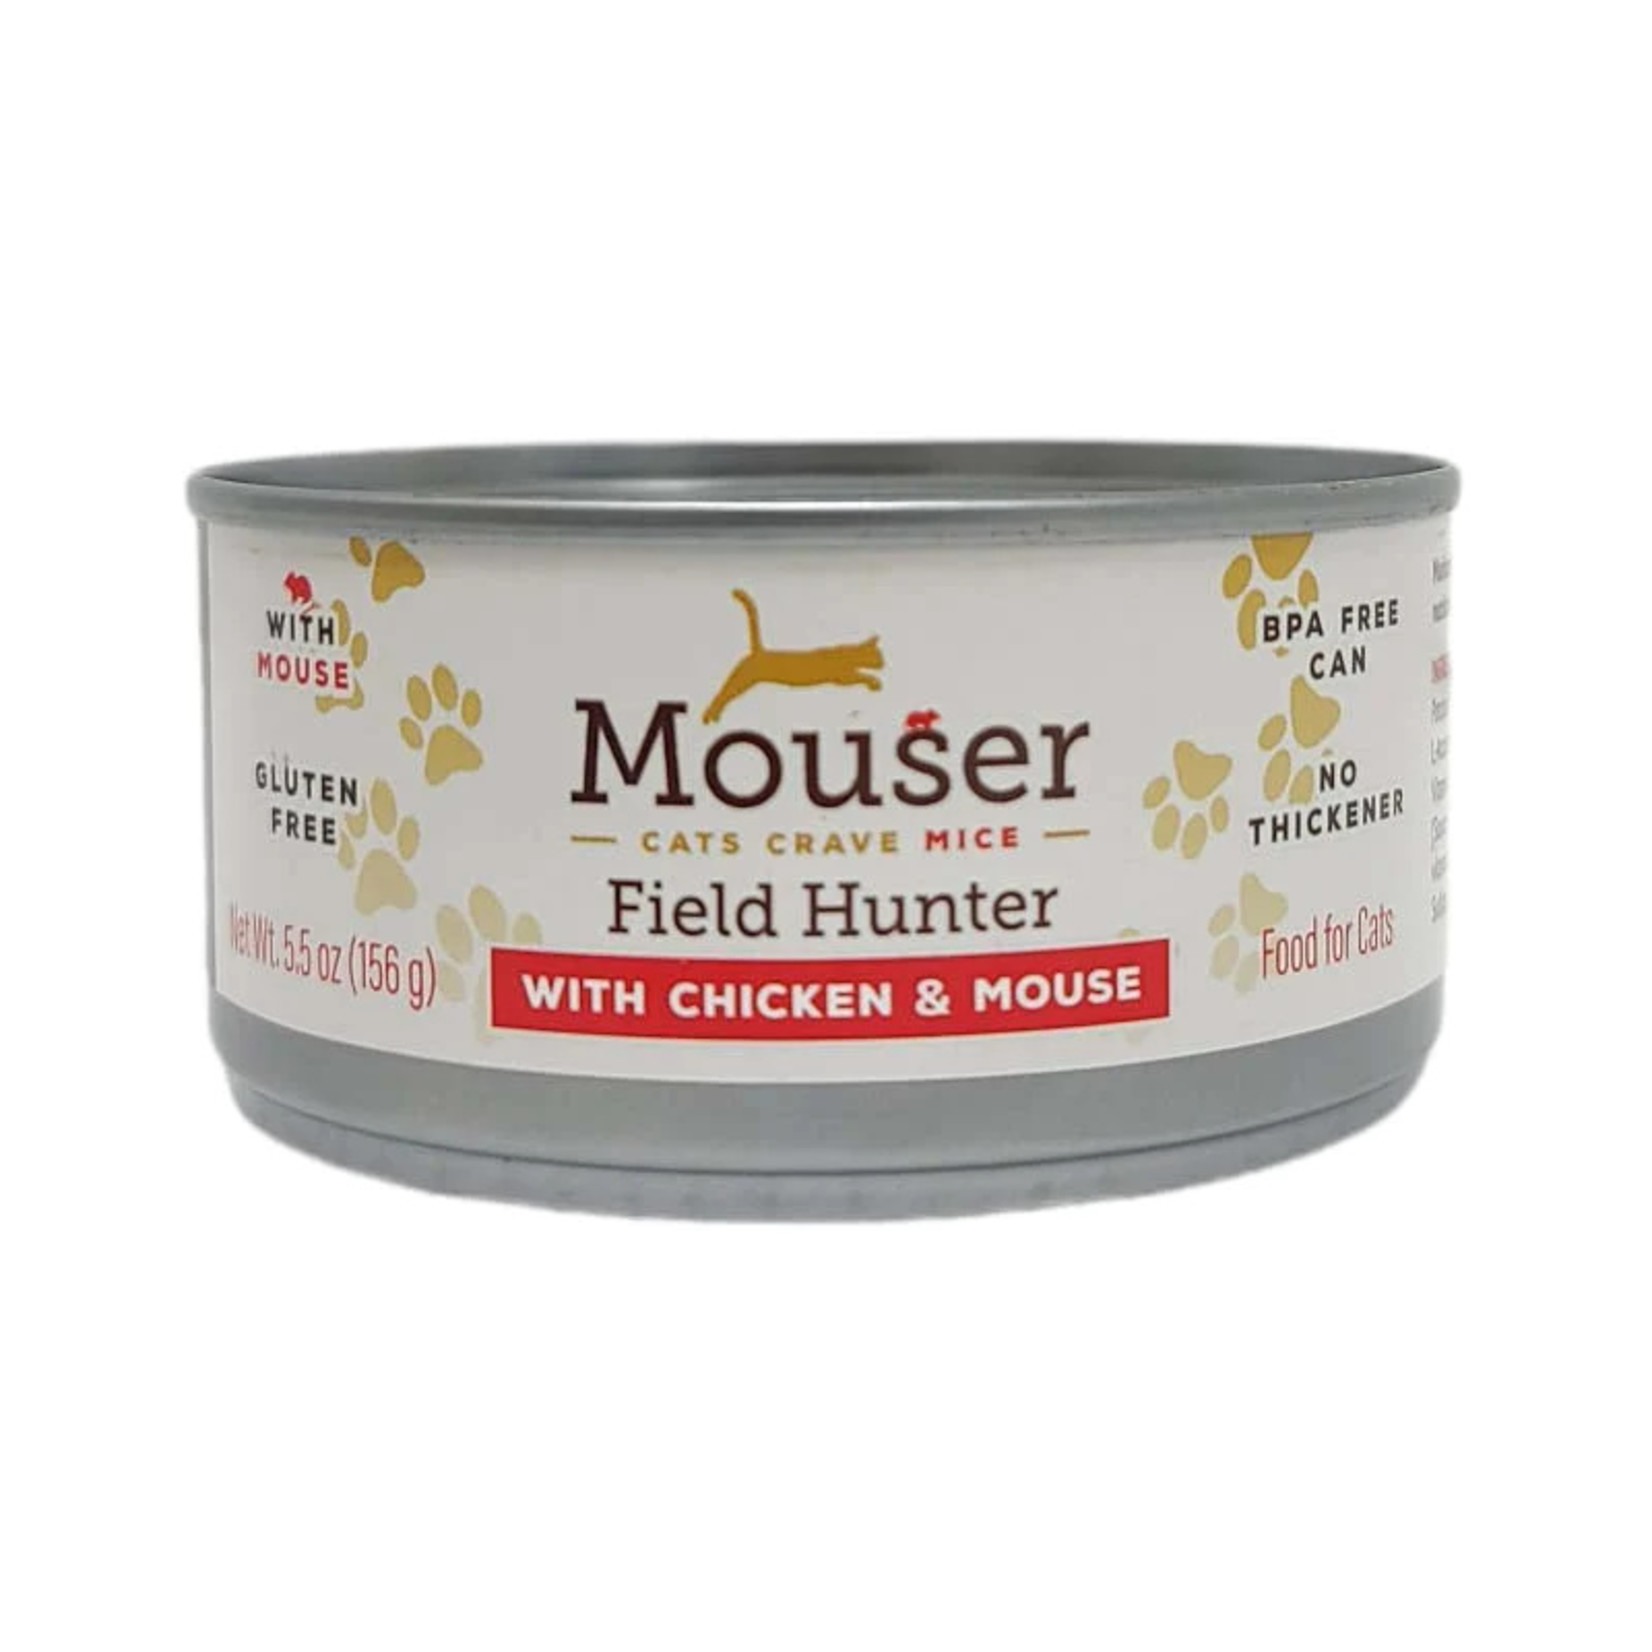 Mouser Mouser Field Hunter Chicken & Mouse Food for Cats